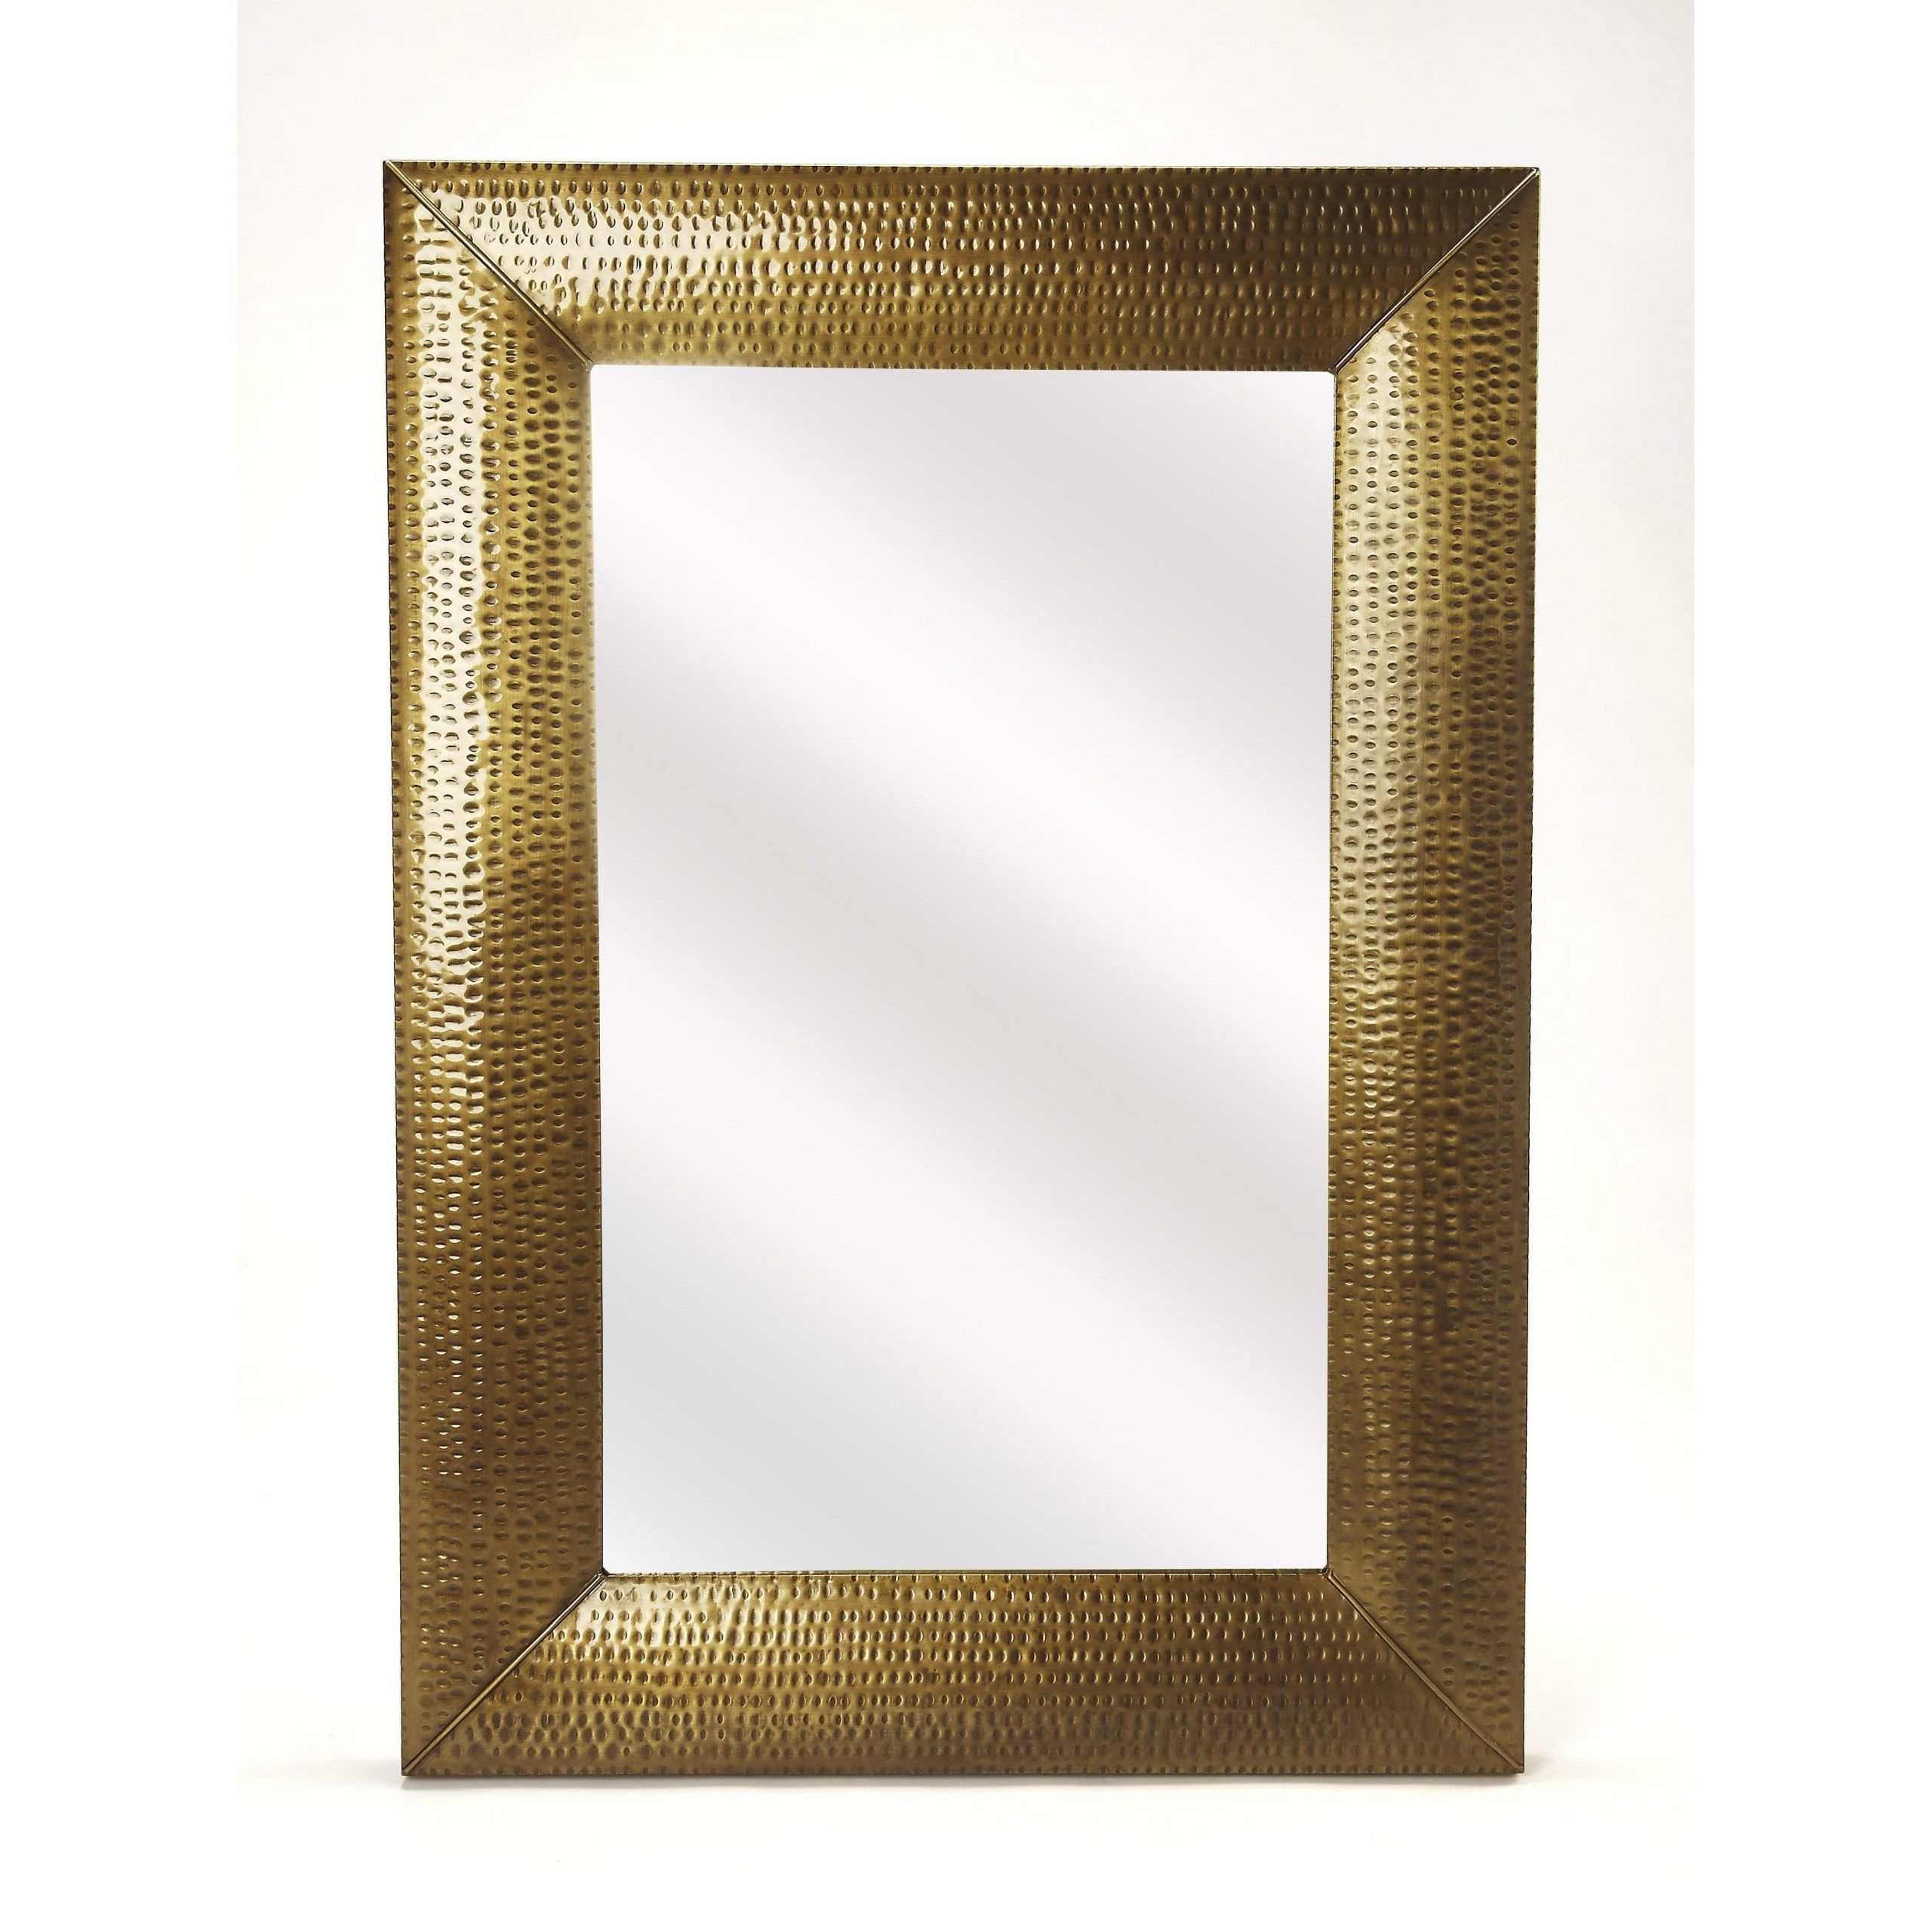 Butler Lehigh Hammered Gold Wall Mirror 4308226 Size: 33"w, 2"d, 47"h Throughout Dandre Wall Mirrors (View 7 of 15)